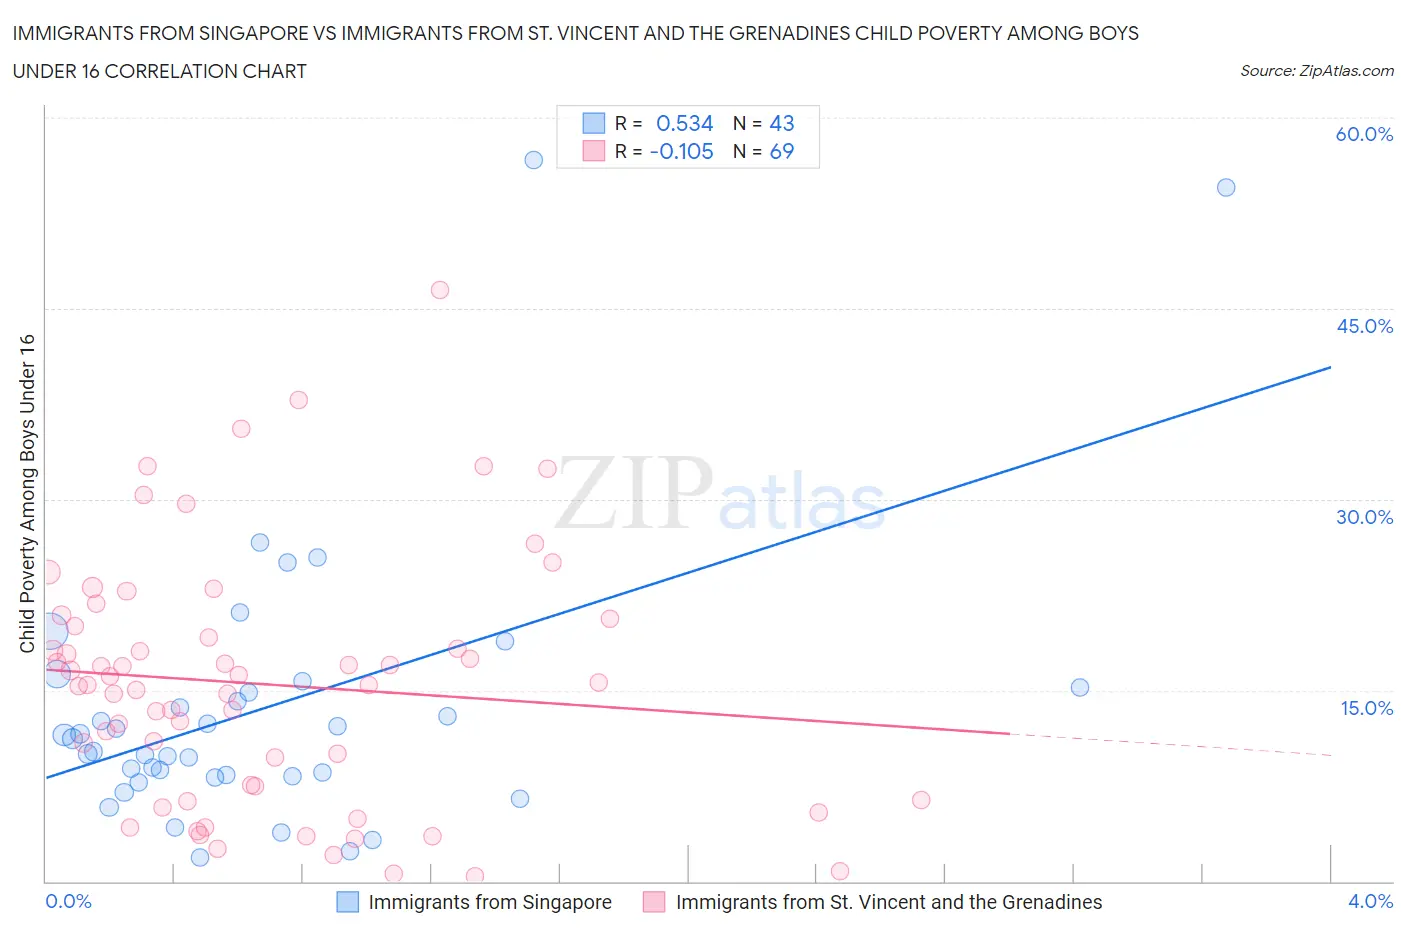 Immigrants from Singapore vs Immigrants from St. Vincent and the Grenadines Child Poverty Among Boys Under 16